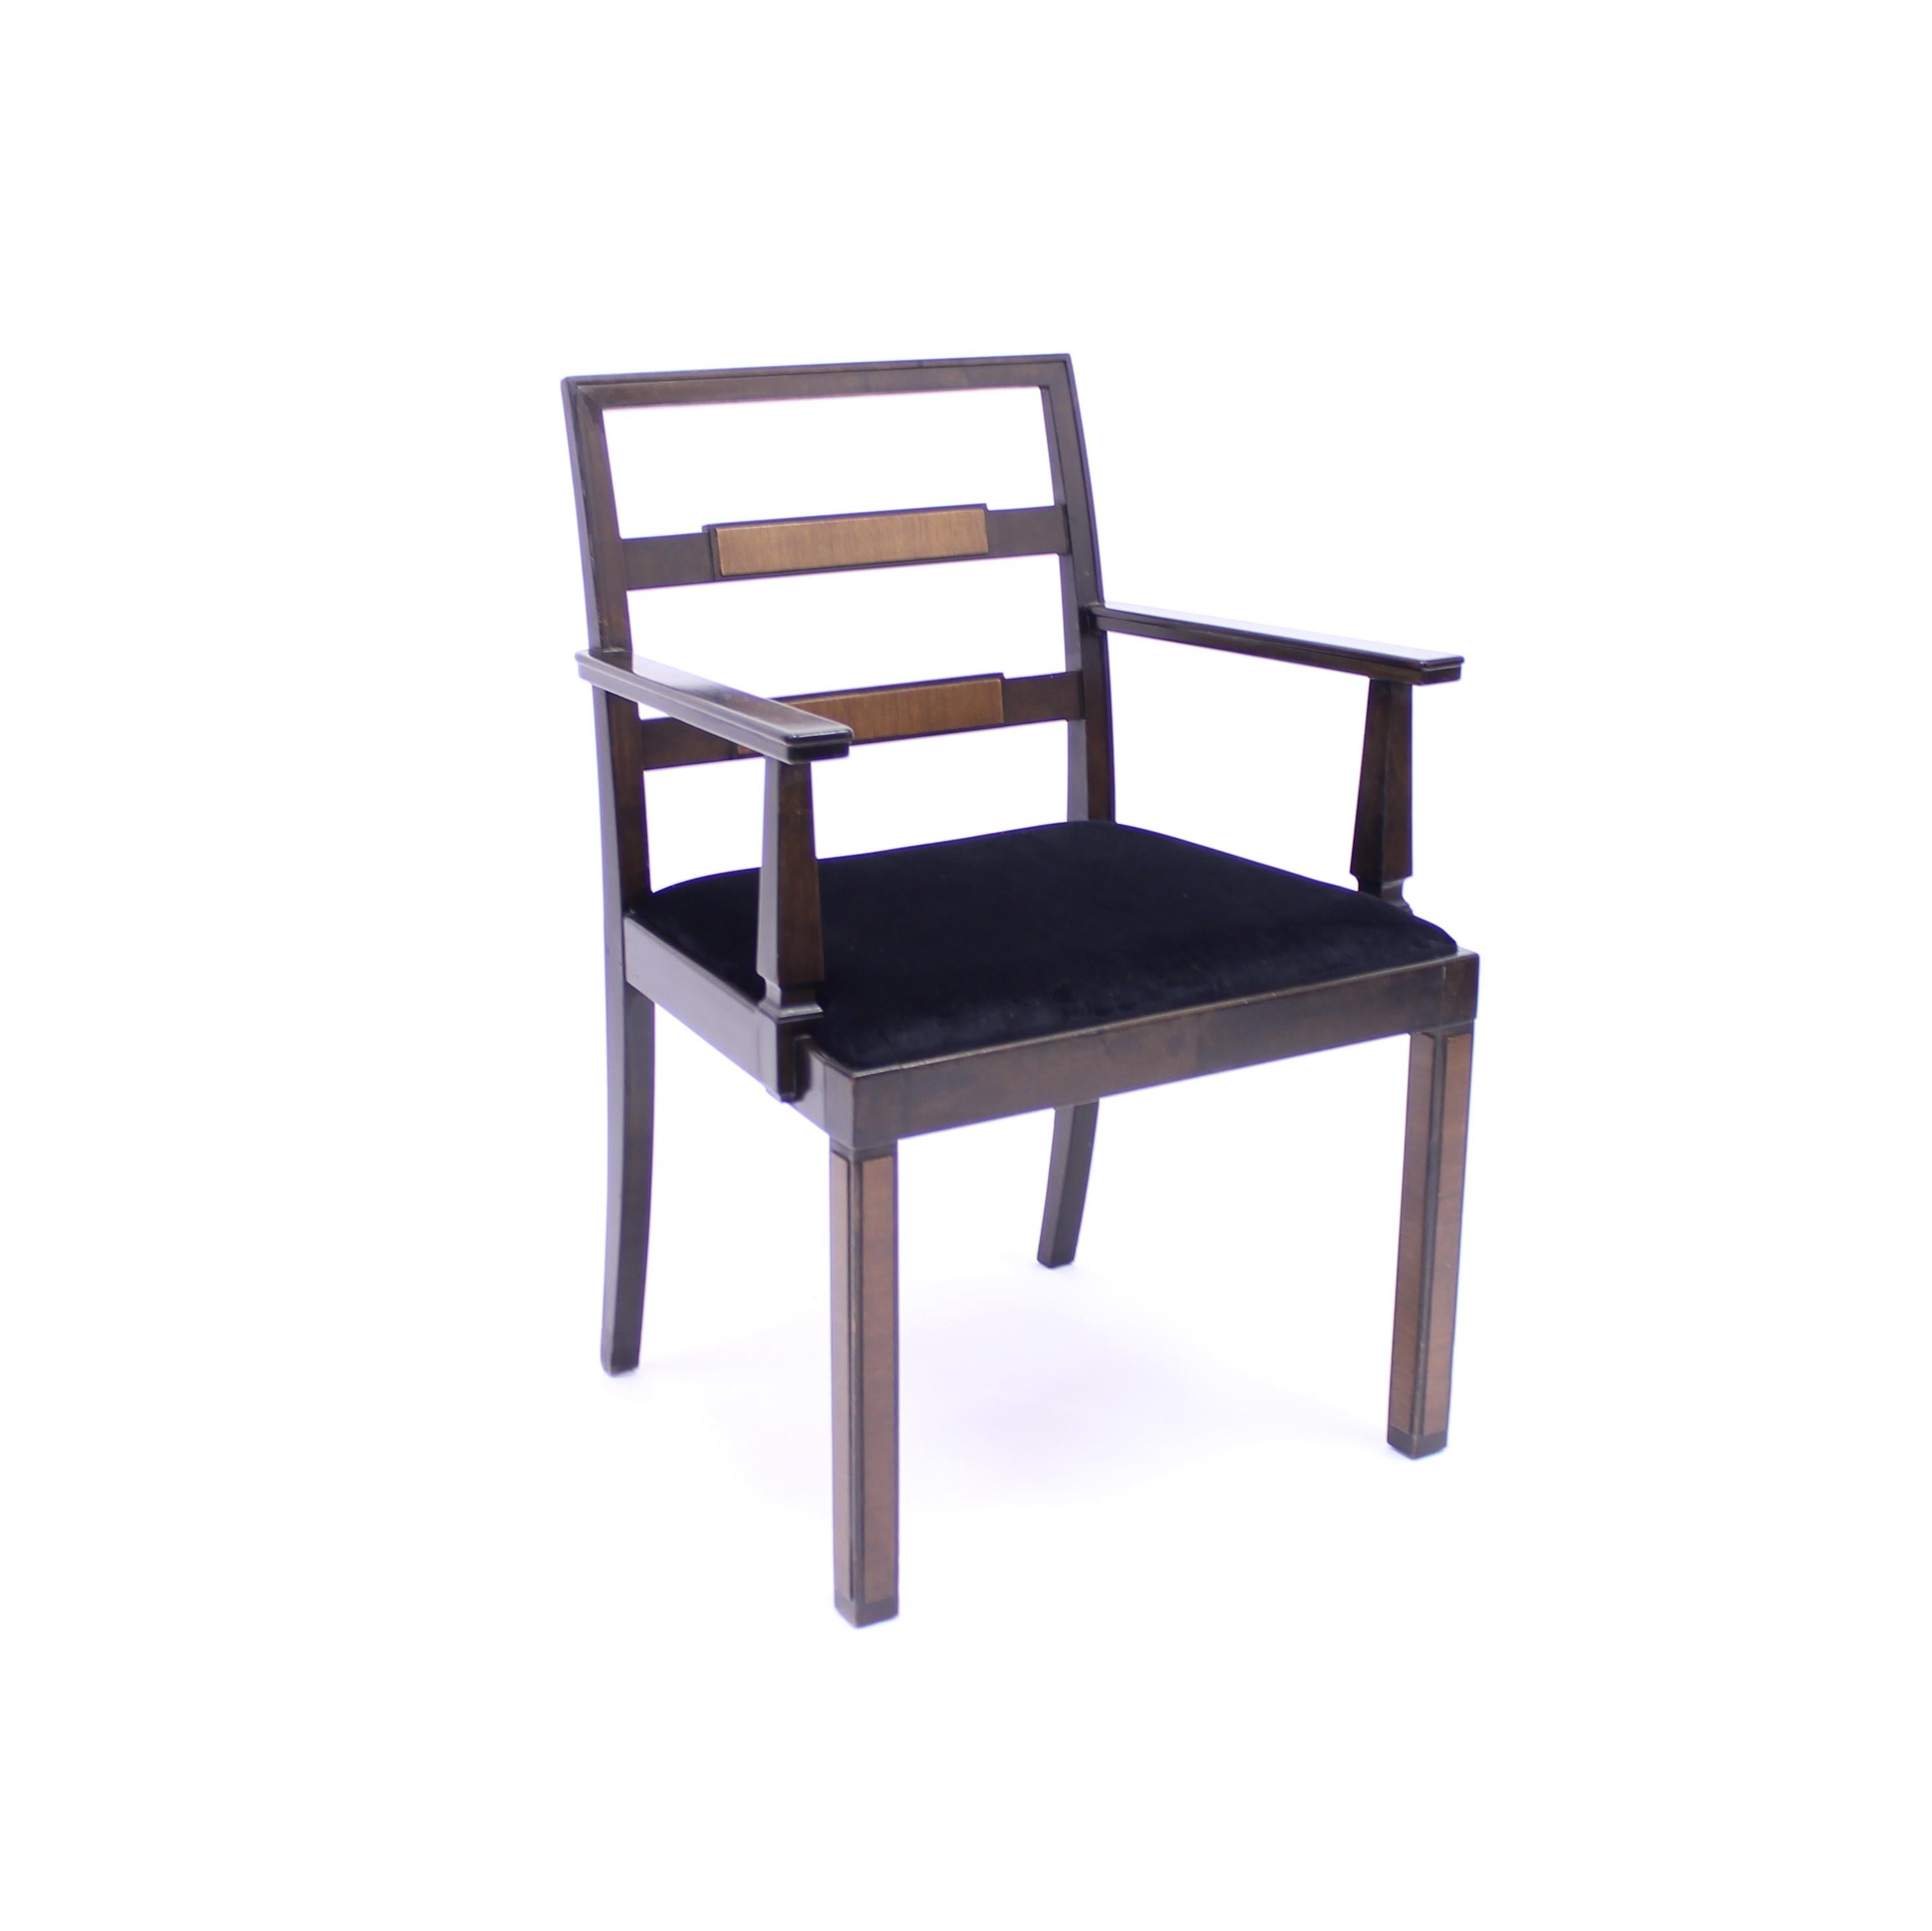 Armchair, model Empire, attributed to Axel Einar Hjorth, manufactured by Nordiska Kompaniet. Produced in 1934. Stained Birch frame with Walnut inlays on the backrest and legs. New black velvet upholstery on the seat

This model is recorded in the